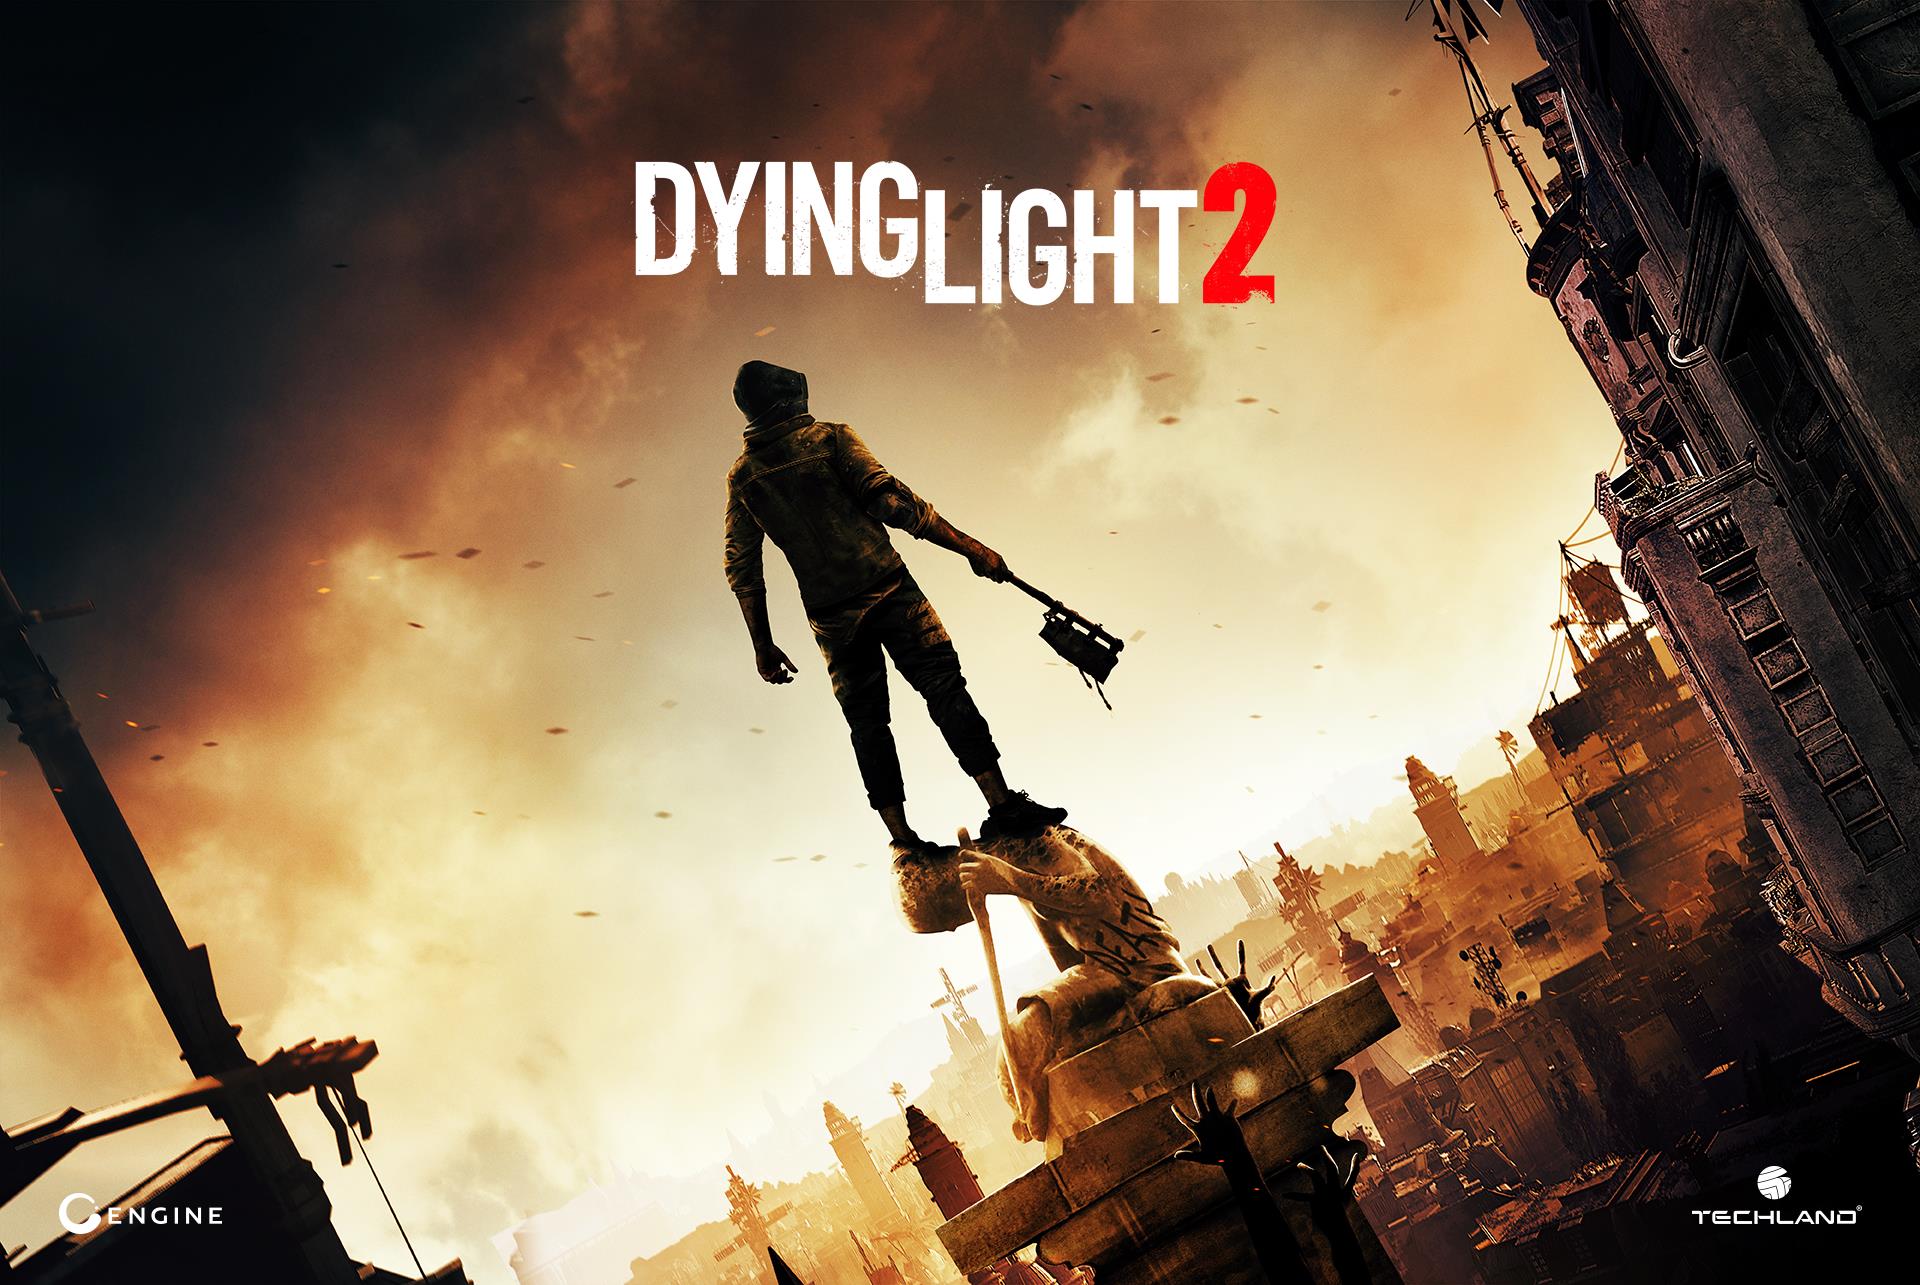 Image for Dying Light 2's lead designer talks about the game's new engine, emergent combat system, and narrative